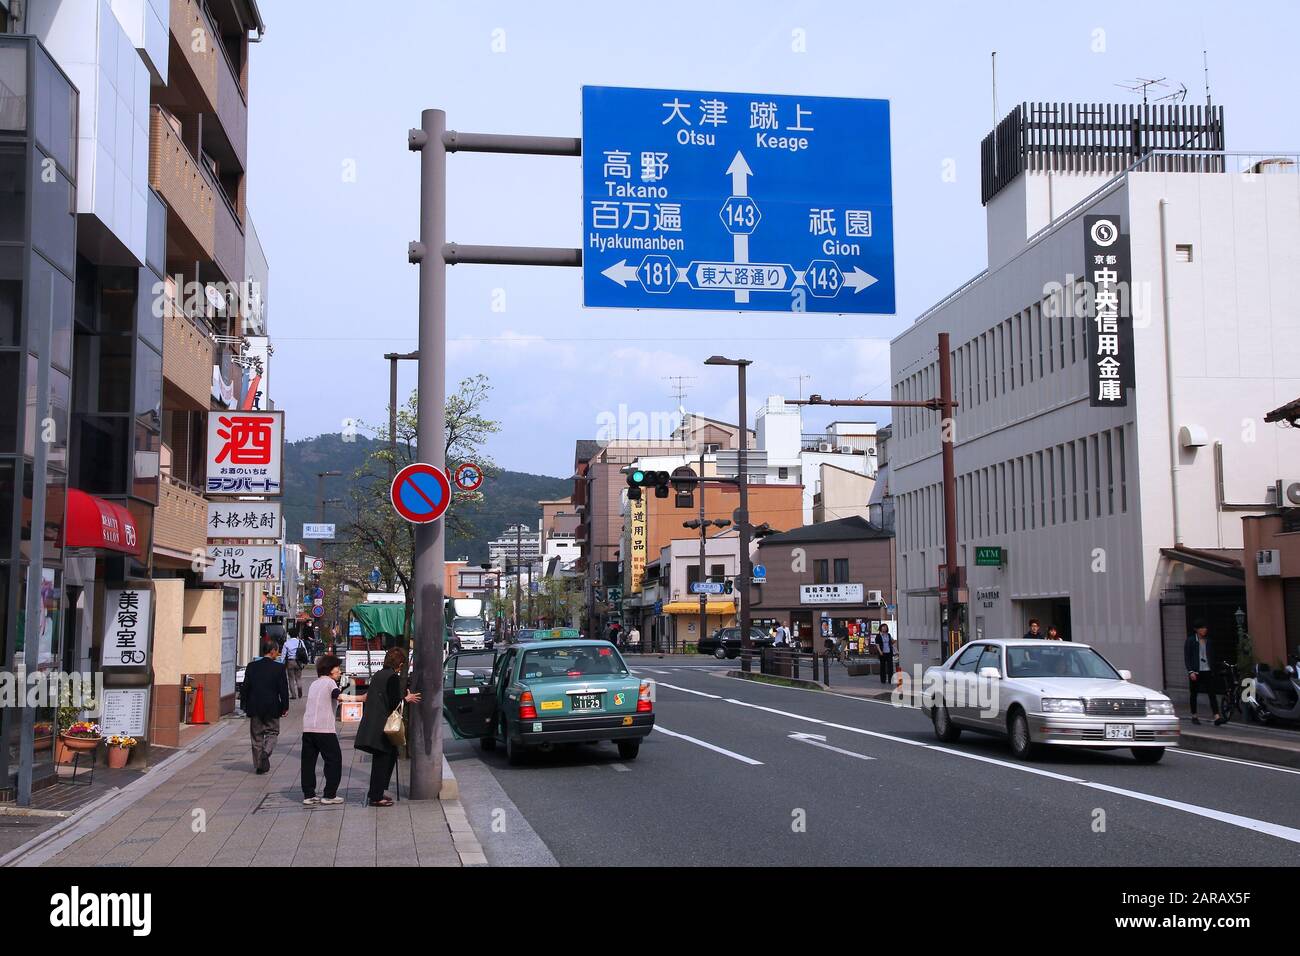 KYOTO, JAPAN - APRIL 19, 2012: People walk in downtown Kyoto, Japan. Kyoto is the former imperial capital of Japan, now it's a major city with 1.5 mil Stock Photo